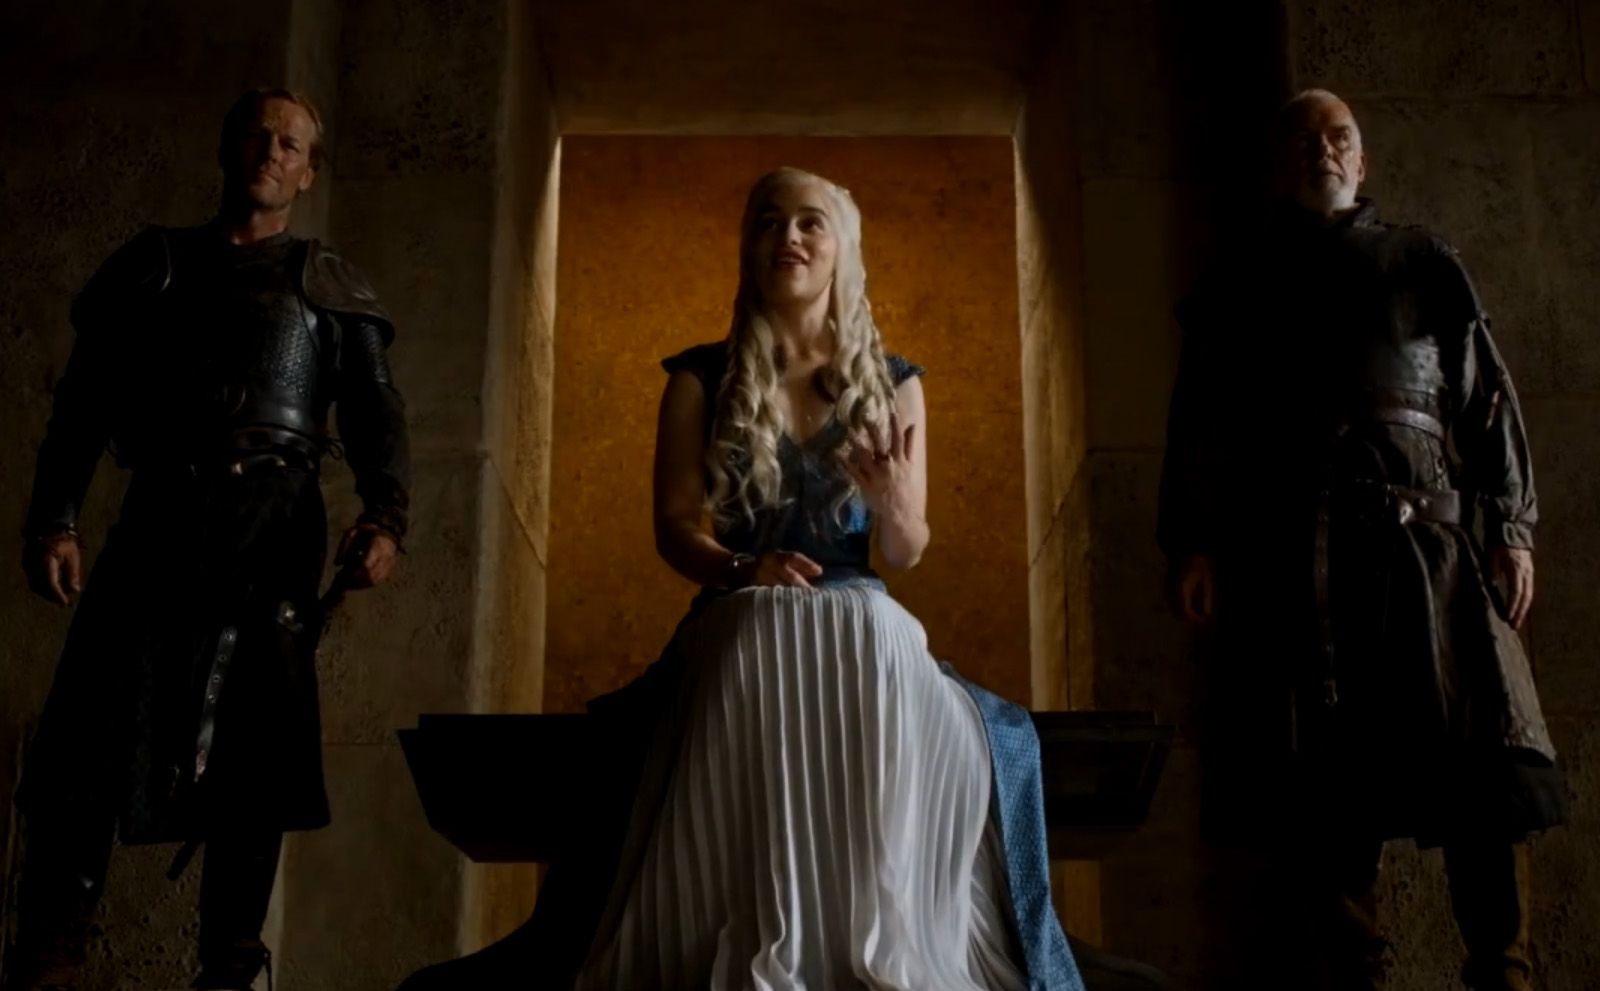 secret game of thrones blooper reel given to a few key fans but you can watch it here image 1